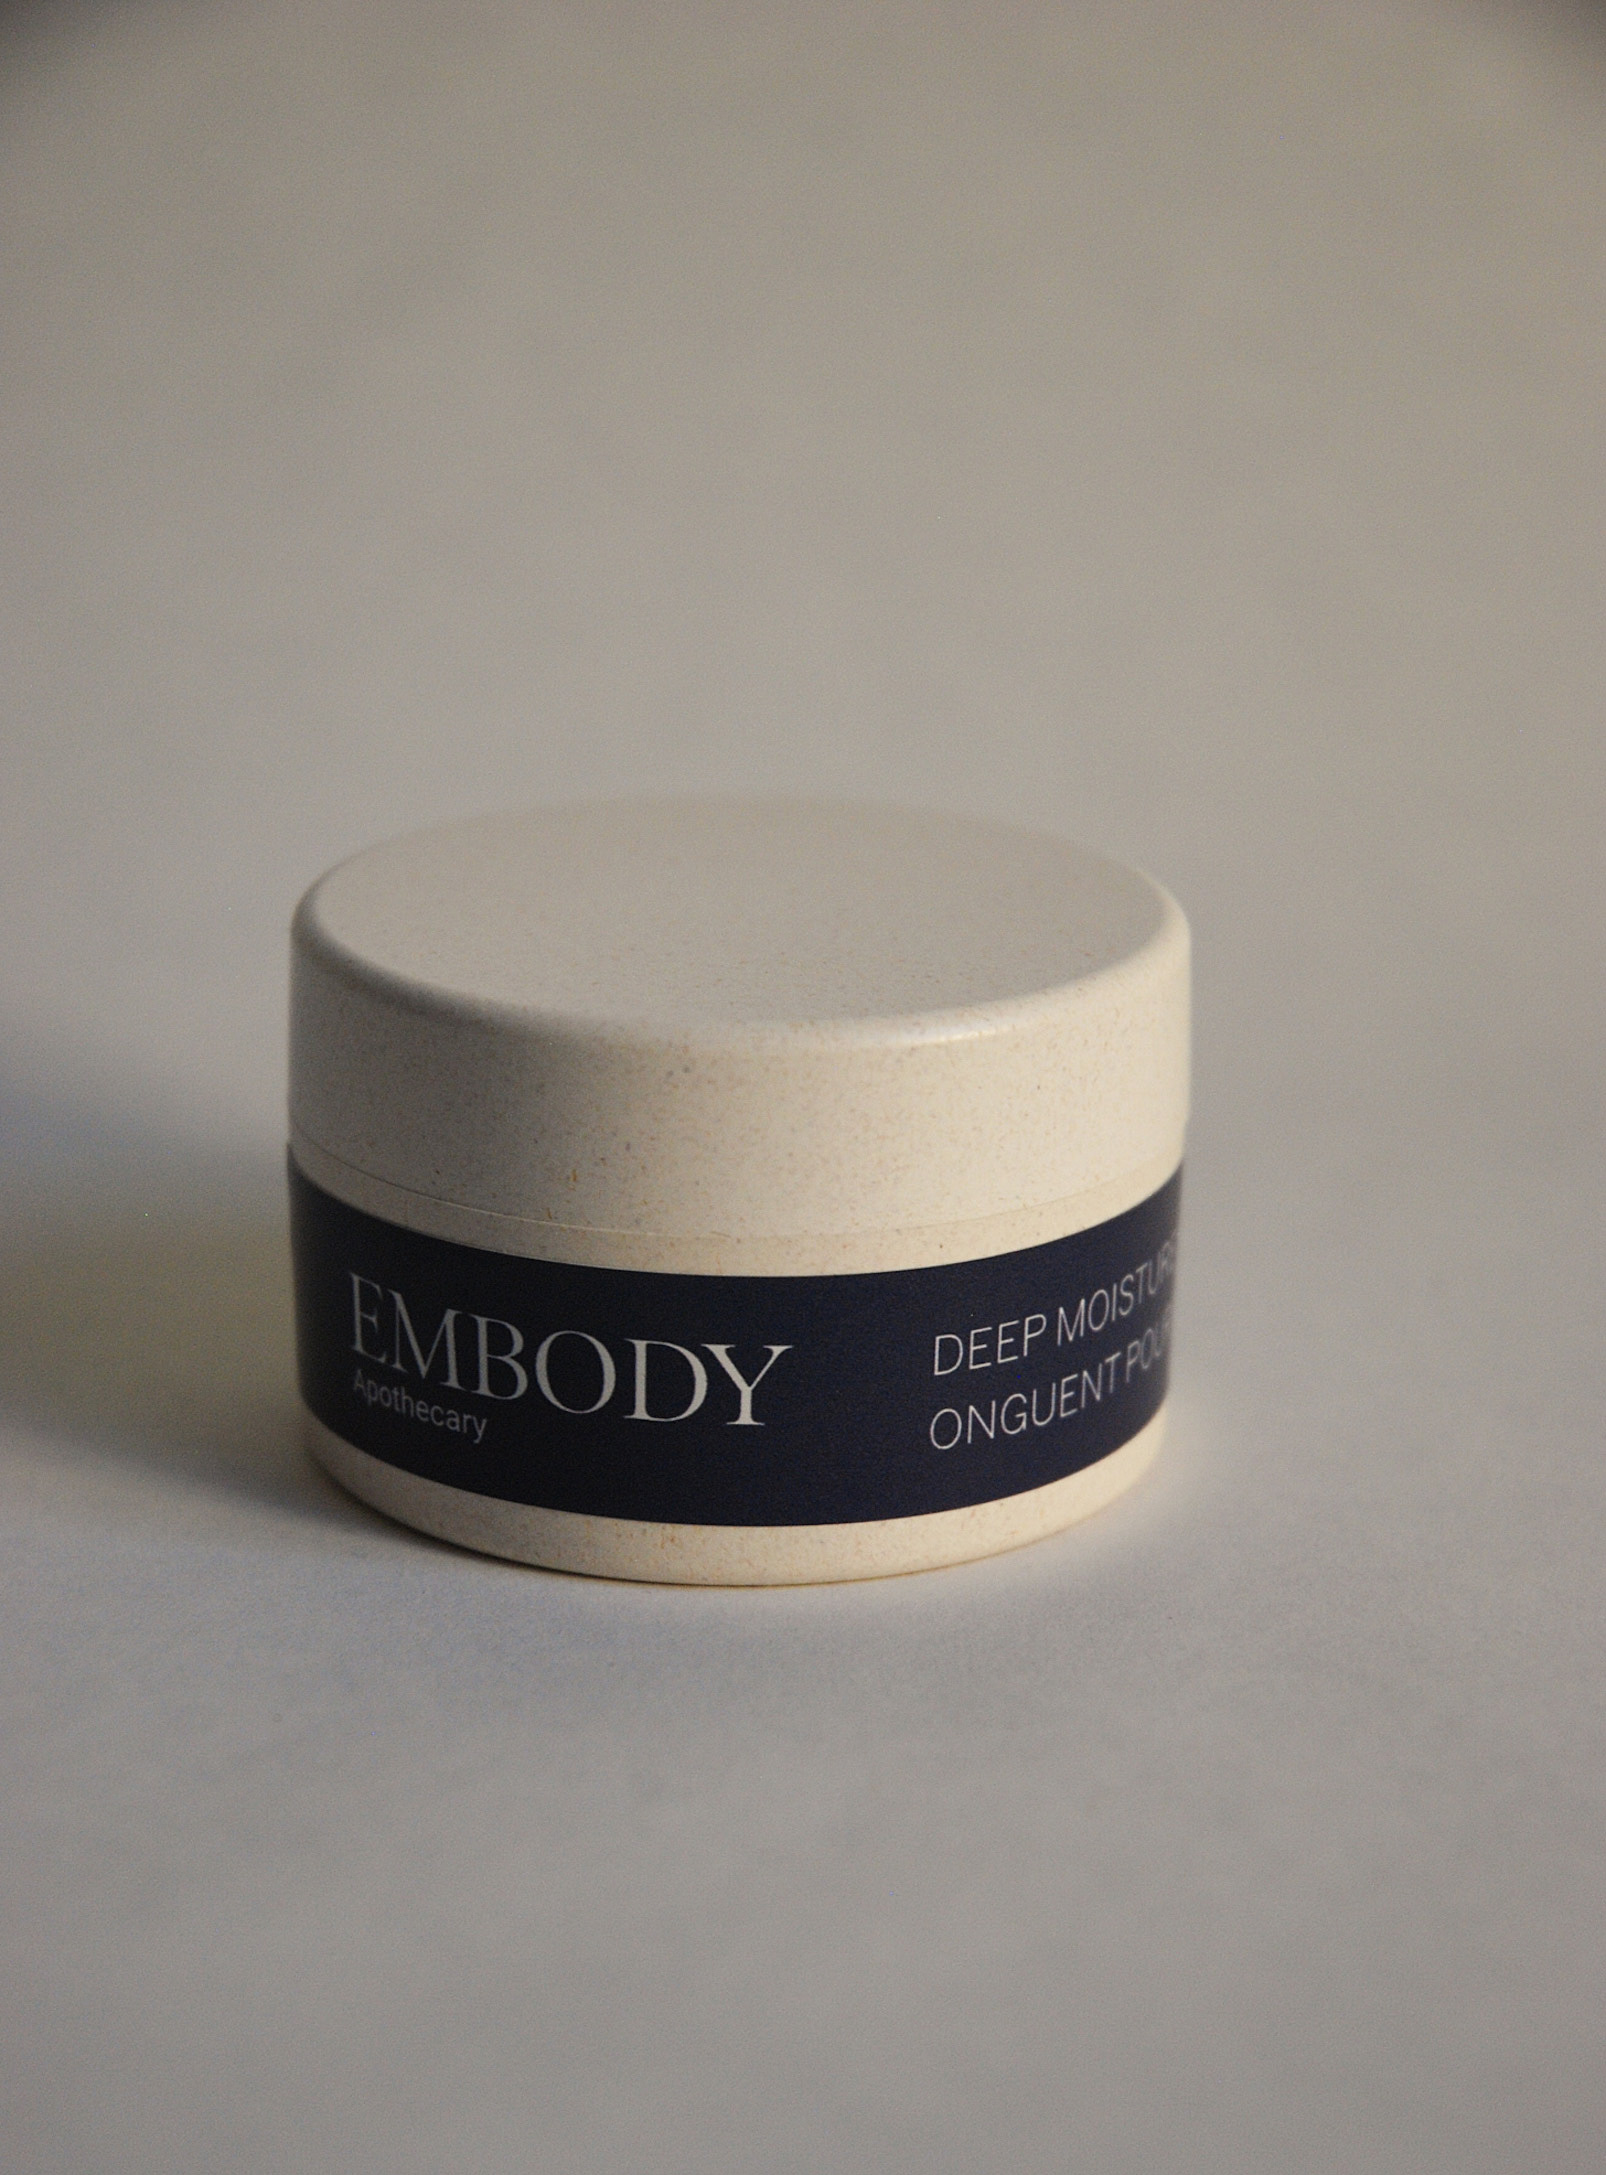 Embody Apothecary - Dry hands ointment